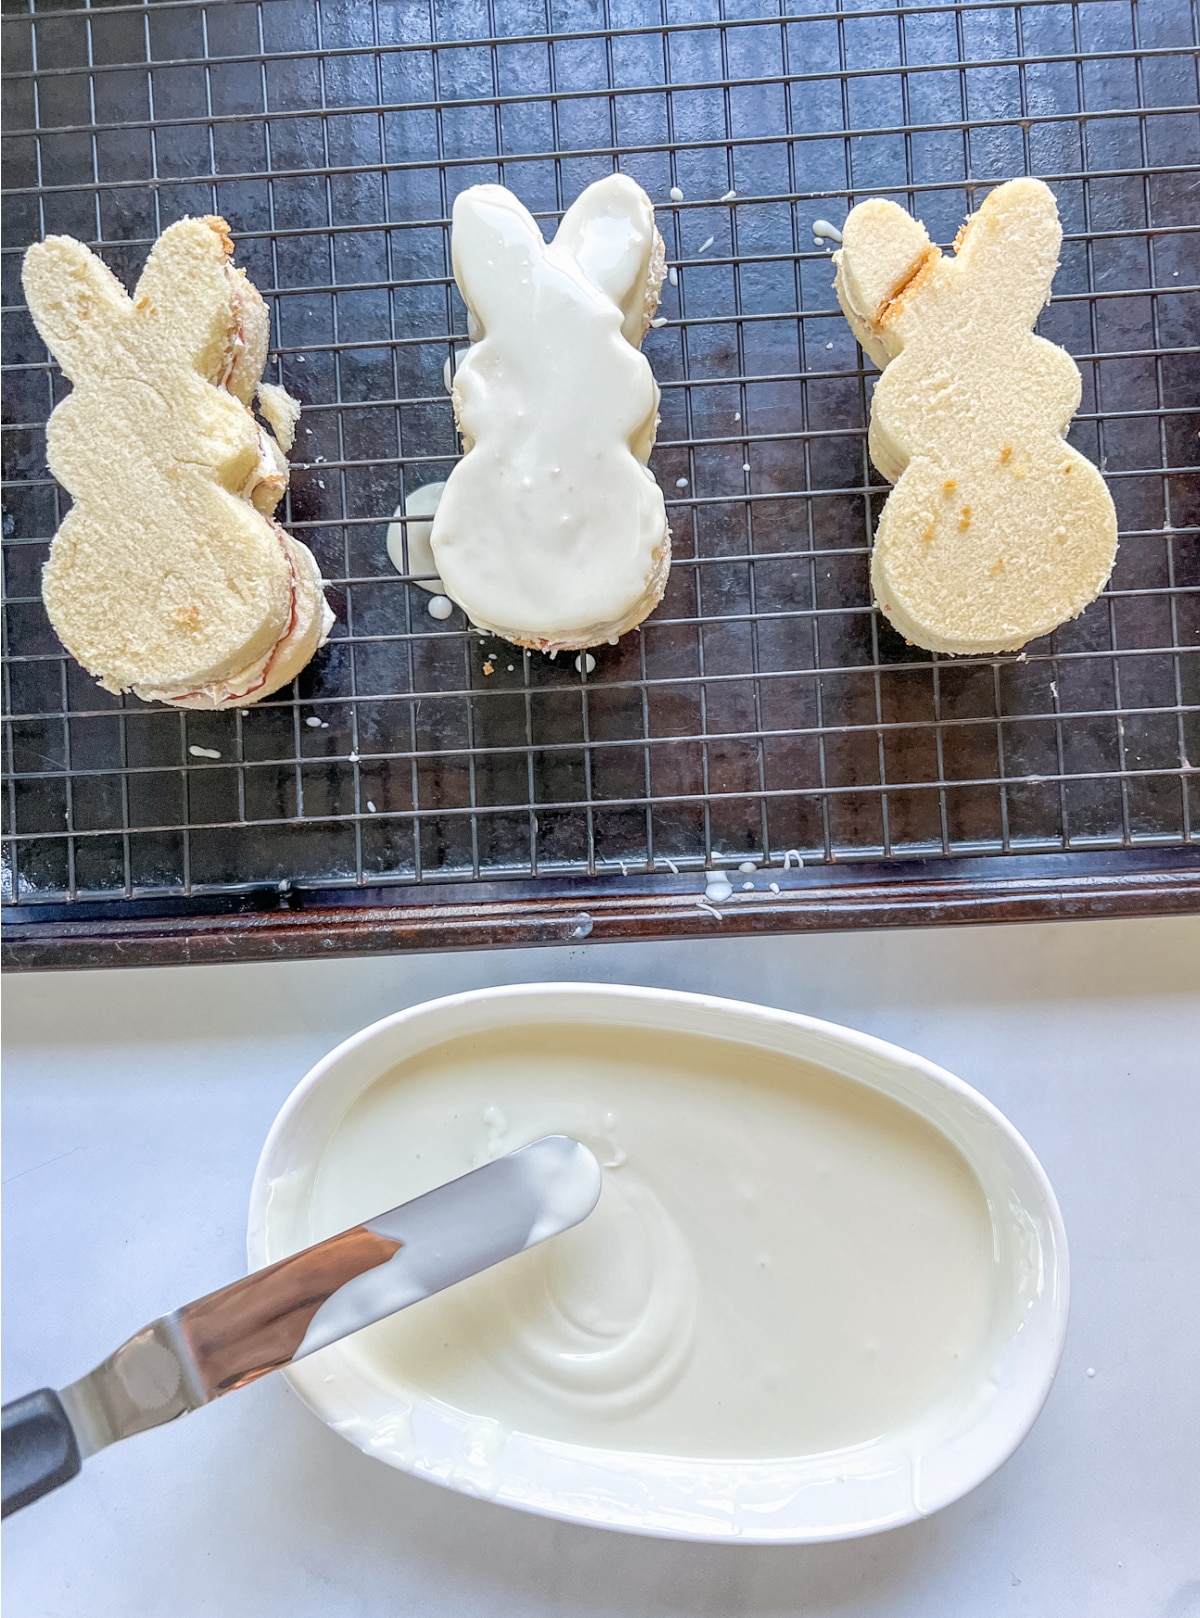 Dip bunny cakes in white melting chocolate